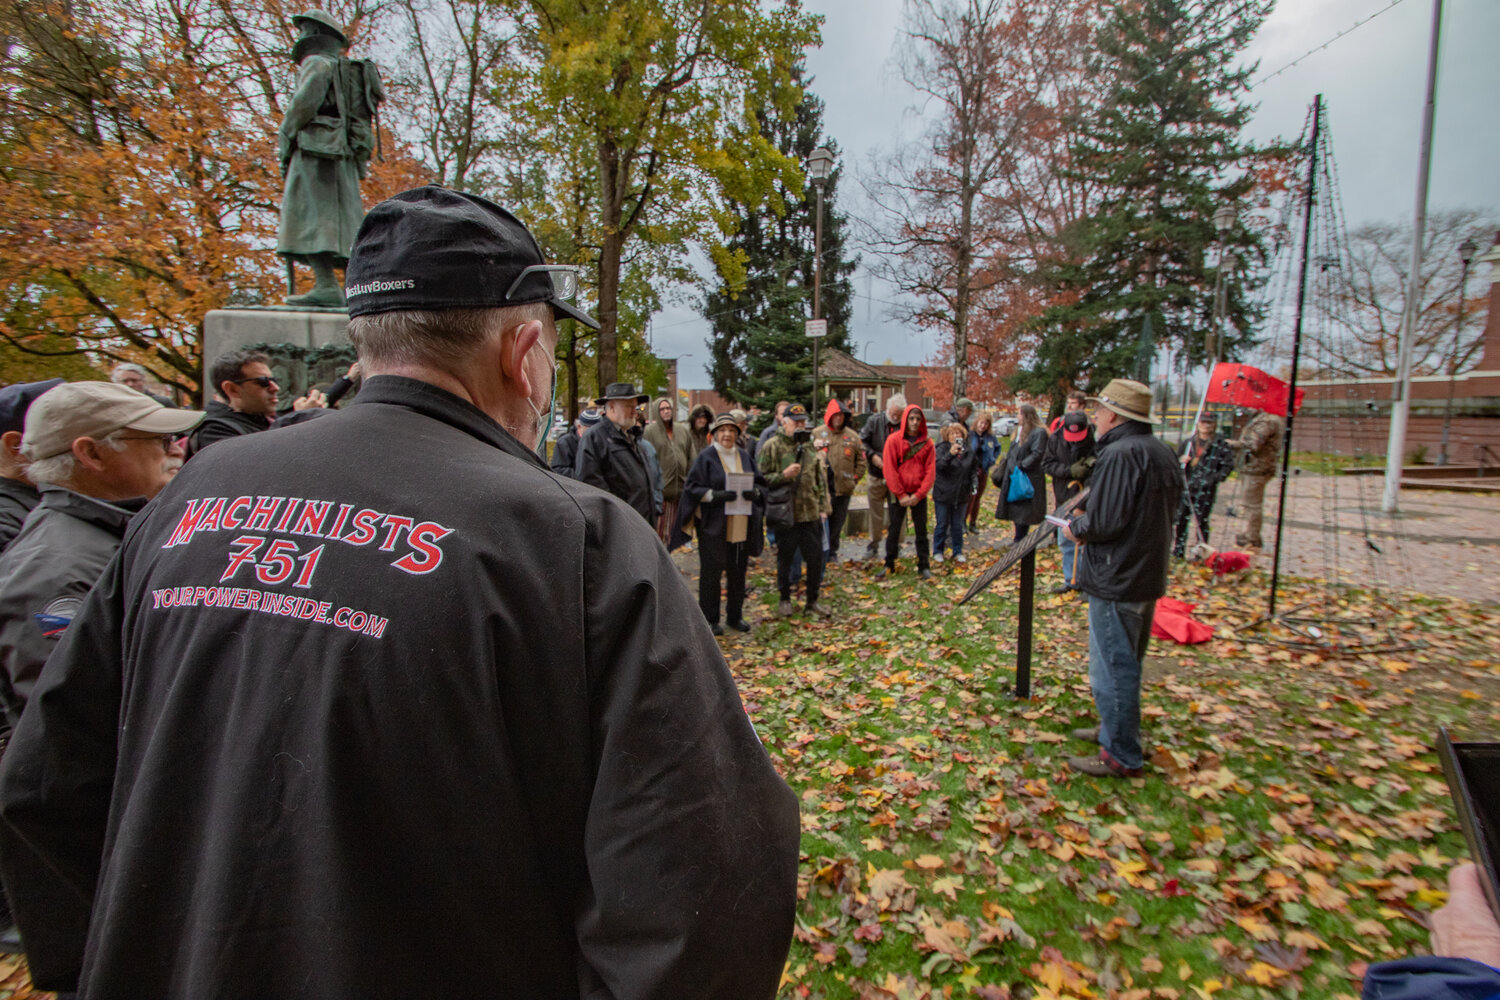 Approximately 50 union members from throughout the region attended the dedication ceremony on Saturday, Nov. 11, for a bronze plaque memorializing the IWW union victims of the Centralia Tragedy of 1919.